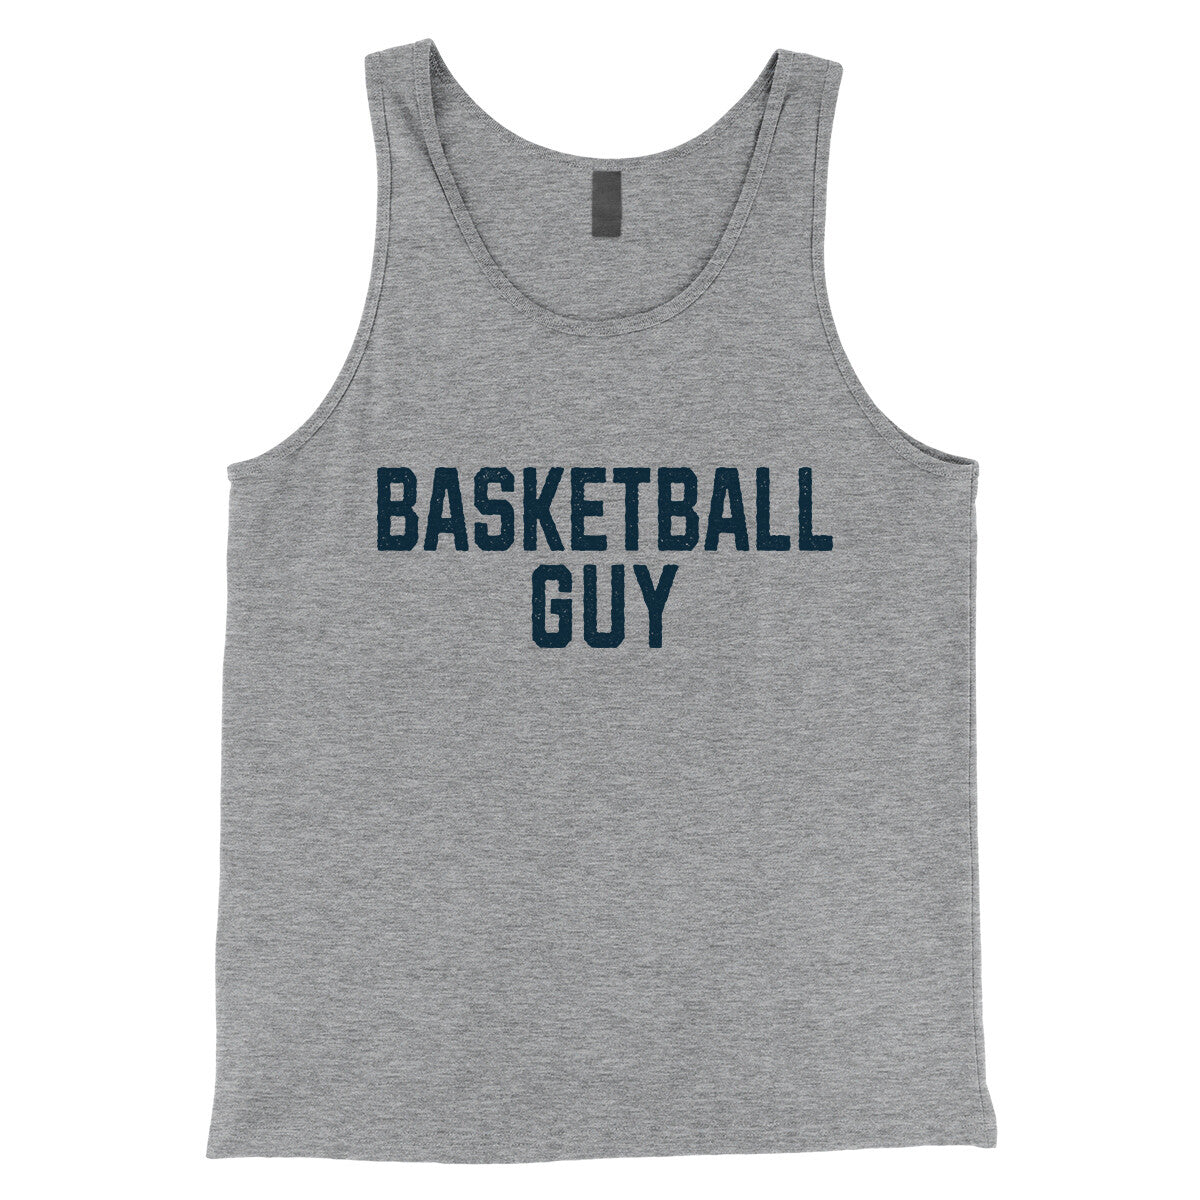 Basketball Guy in Athletic Heather Color